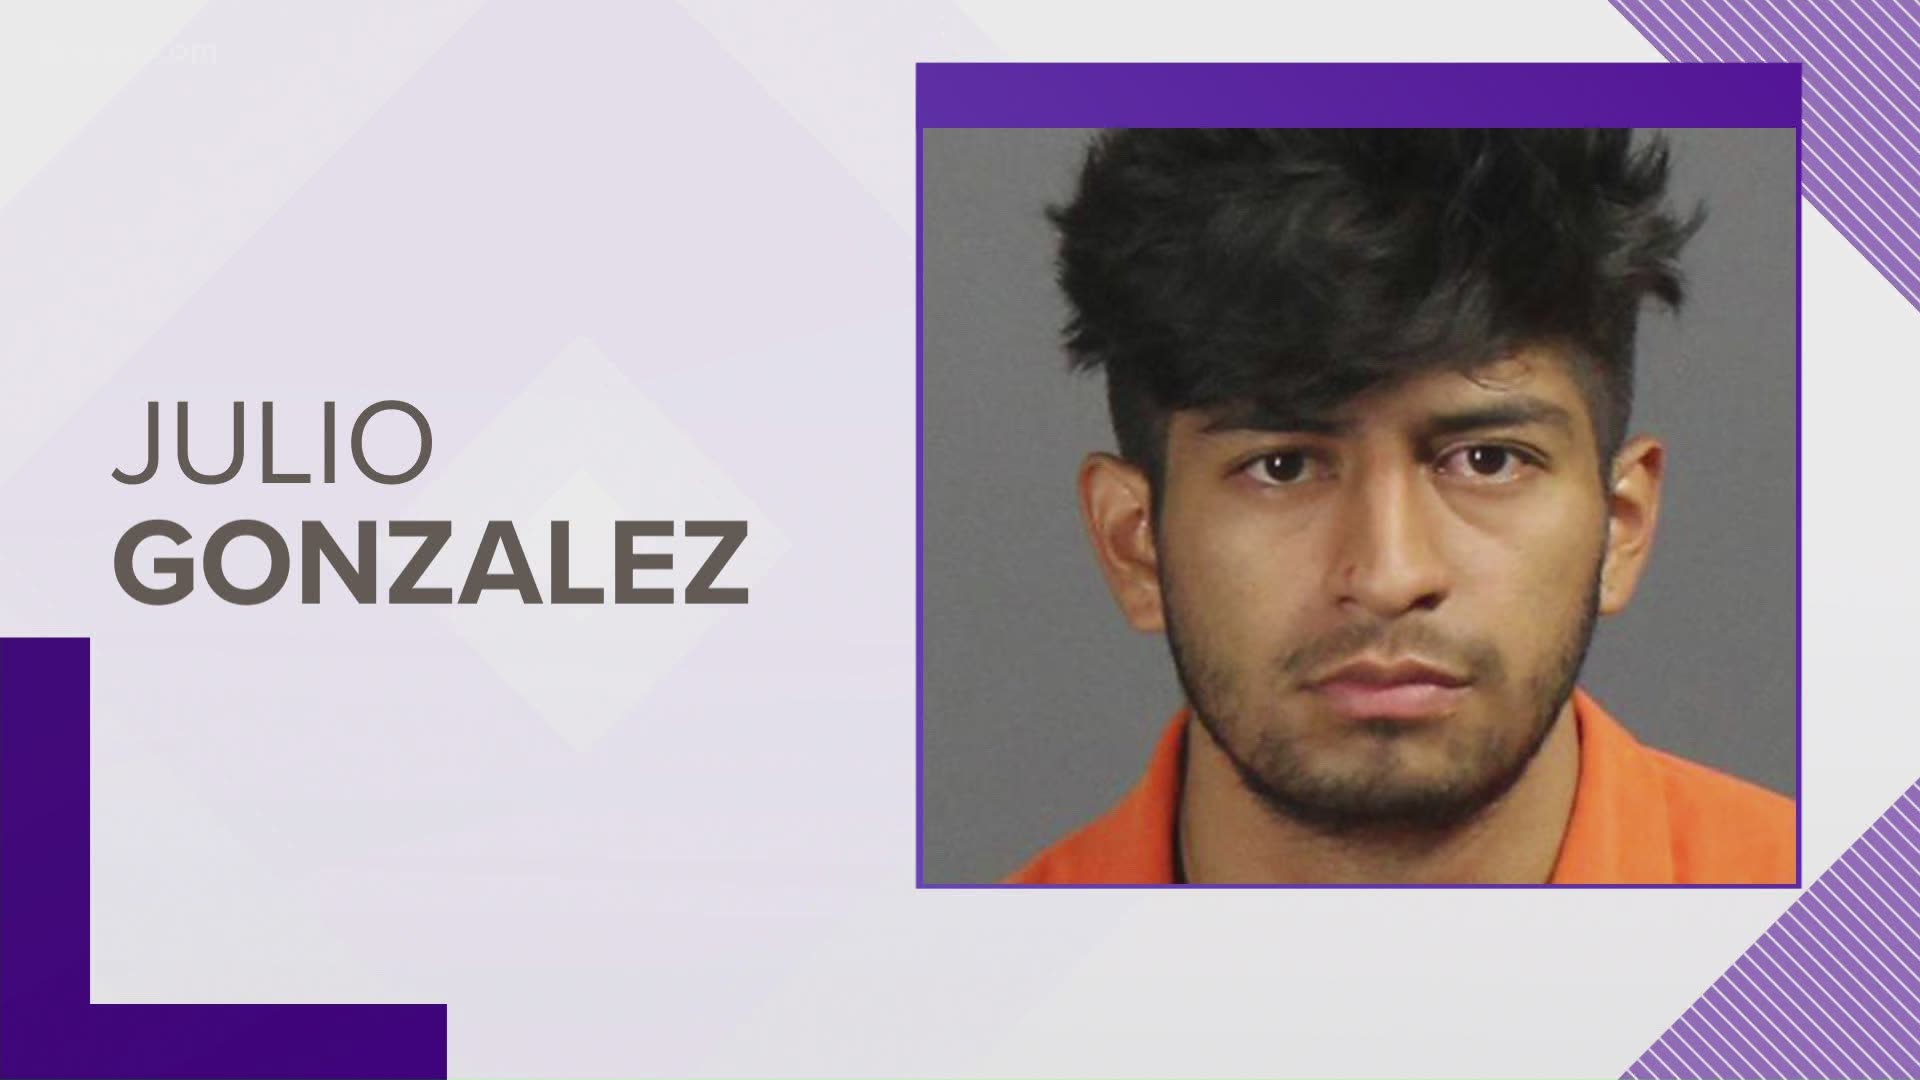 Police said the suspect, Julio Gonzalez, was in custody on unrelated charges when police tied him to the alleged assault.